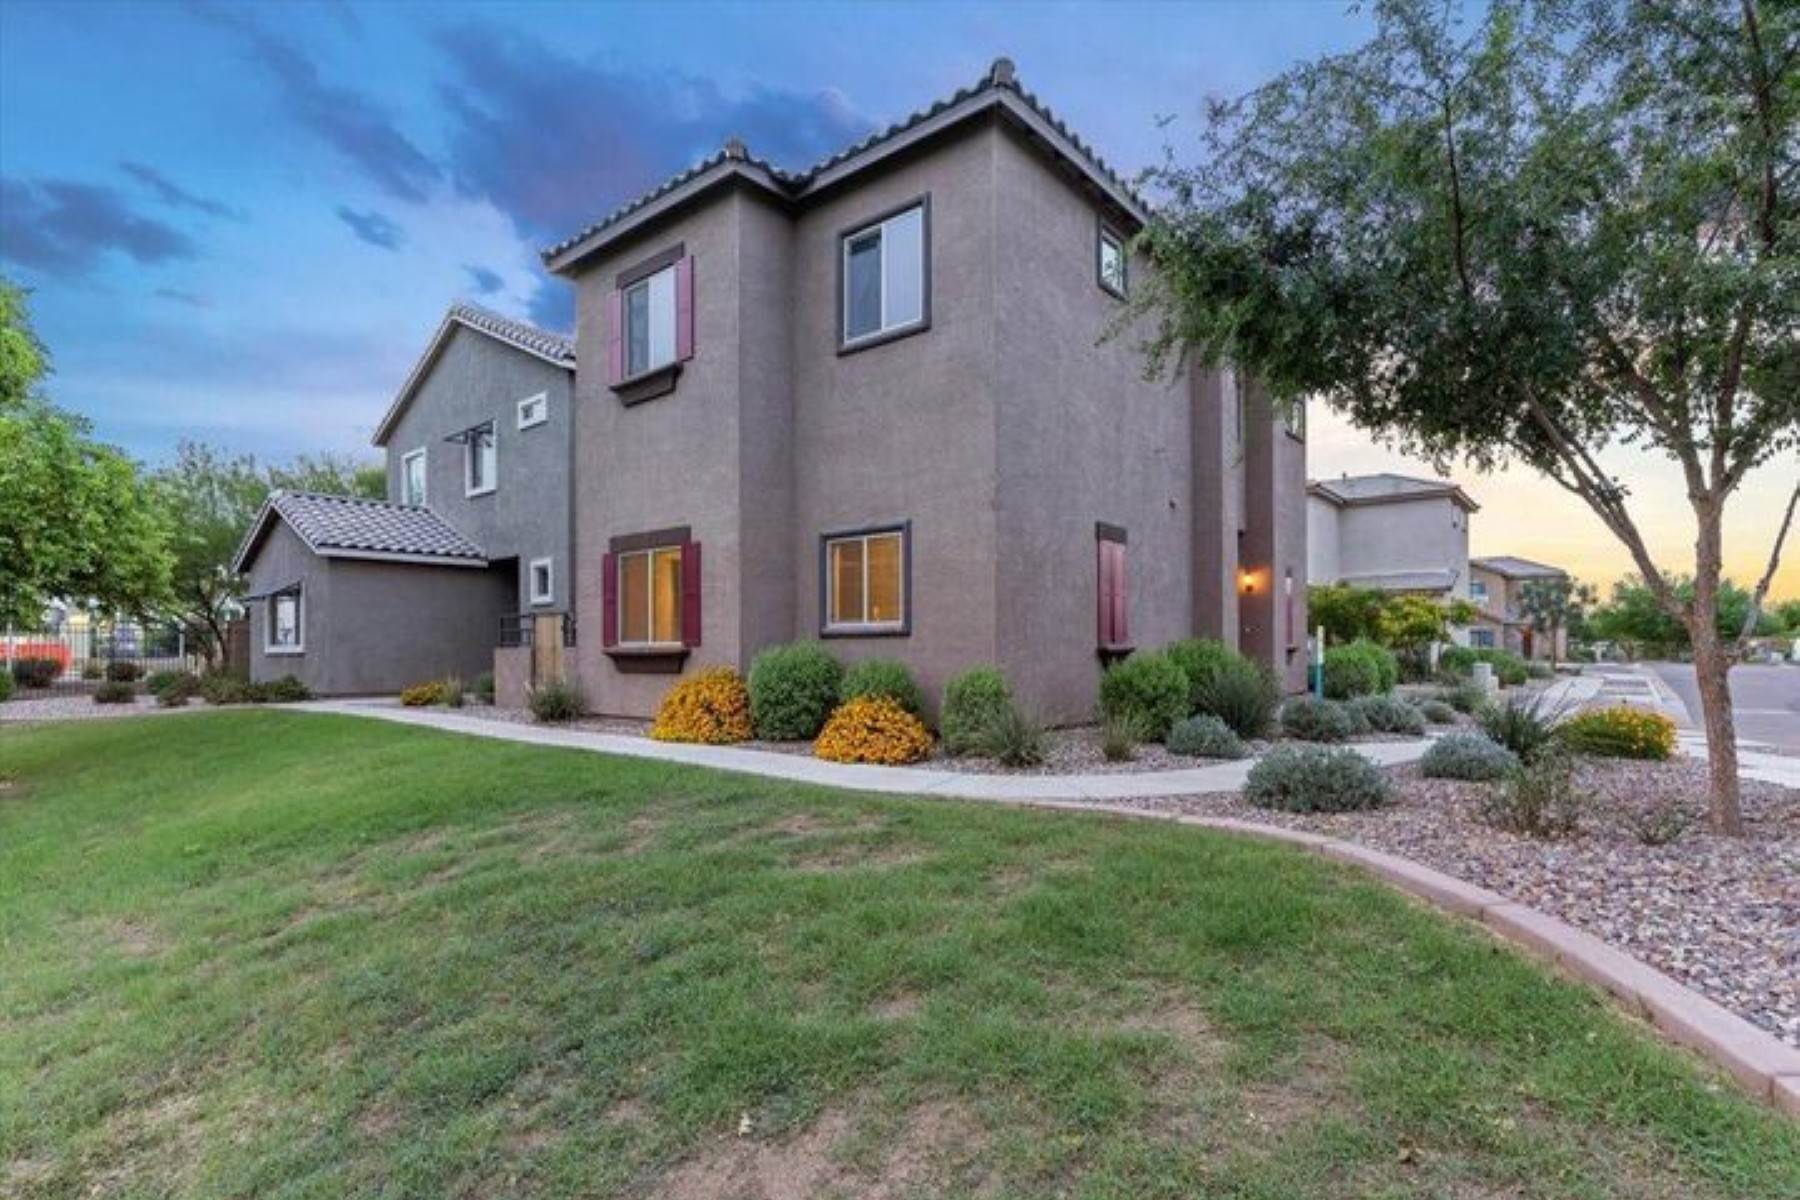 38. Single Family Homes for Sale at Courtyards at Madison Ranch 7312 S 18th Lane Phoenix, Arizona 85041 United States